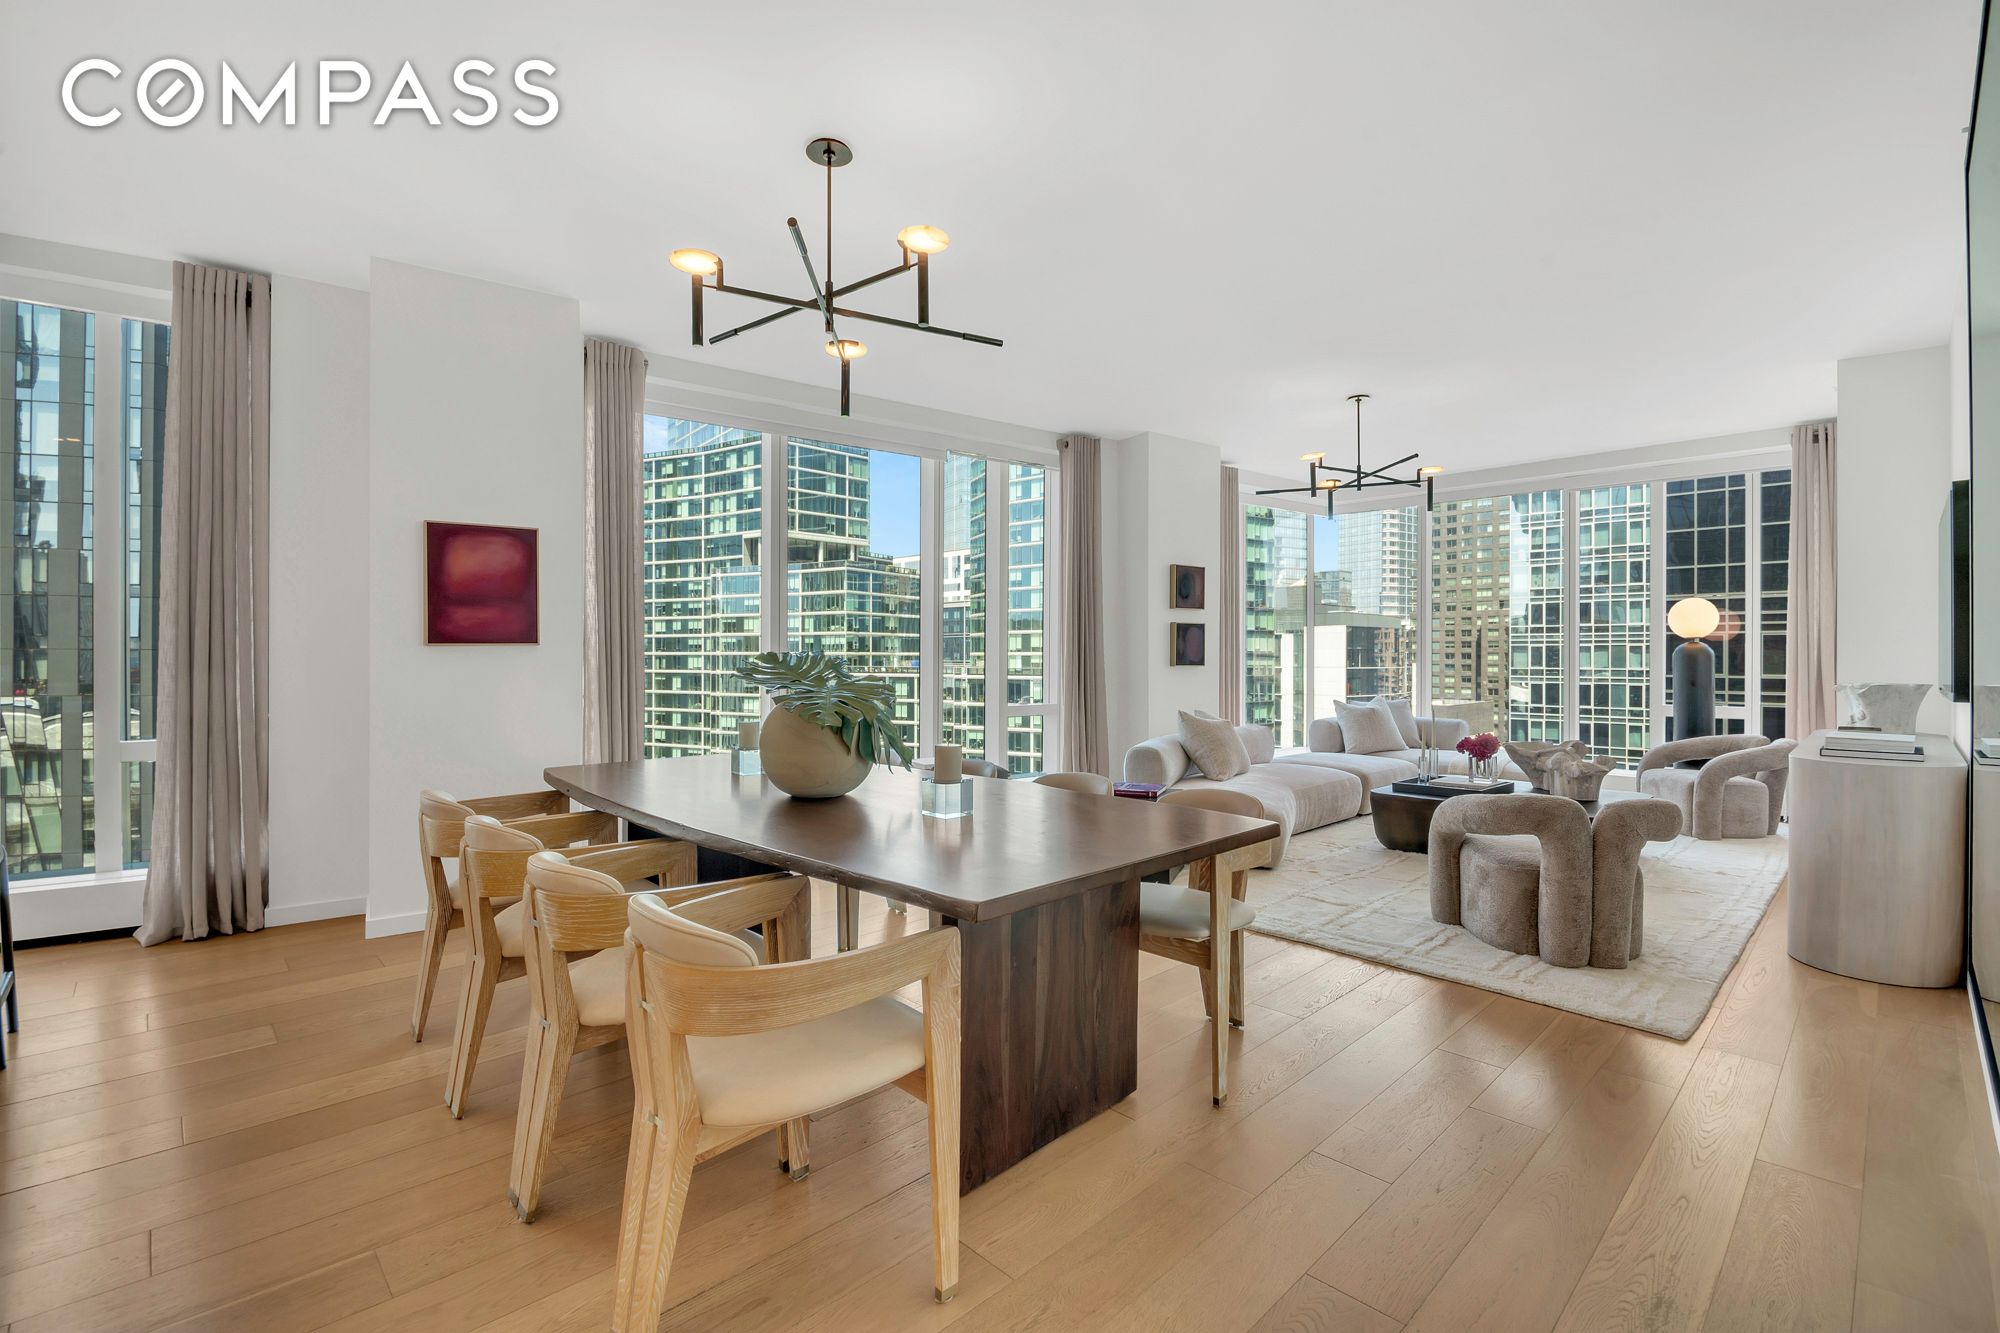 1 West End Avenue 10A, Upper West Side, Upper West Side, NYC - 3 Bedrooms  
3.5 Bathrooms  
5 Rooms - 